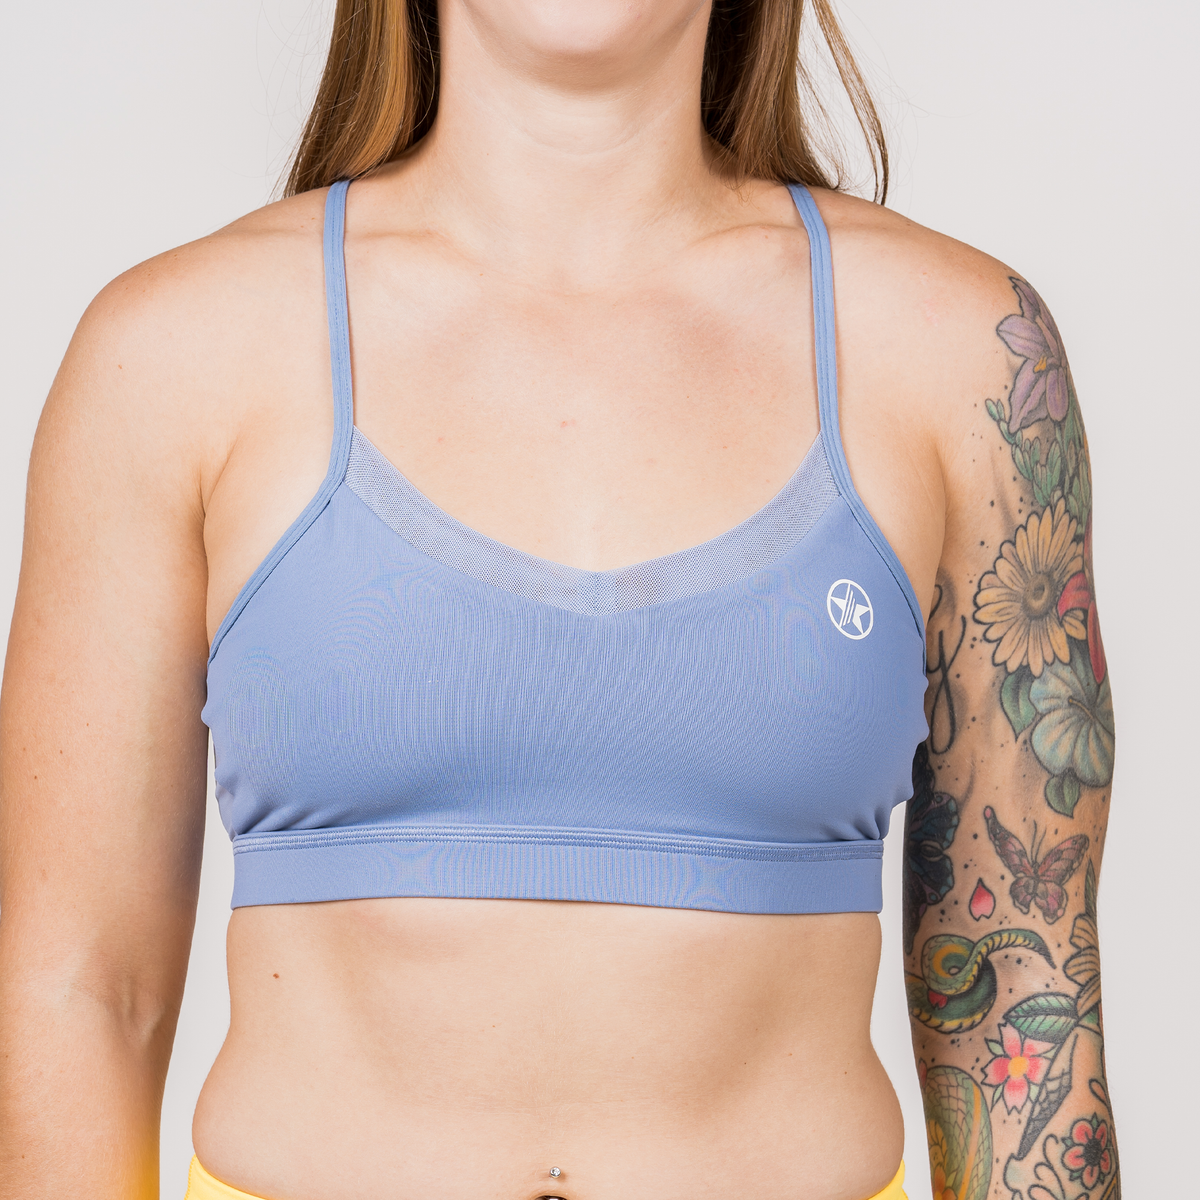 Avia NWT Molded Racer Sports Bra XL Periwinkle Blue Pastel Racerback - $15  New With Tags - From August